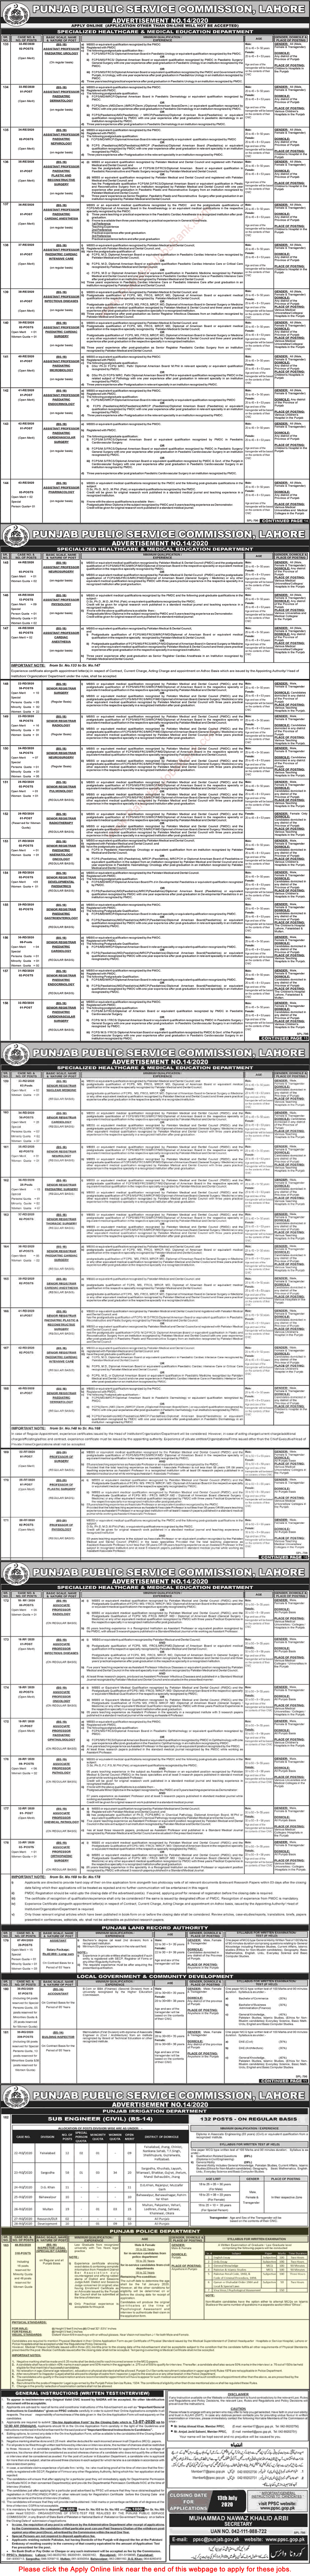 Legal Inspector Jobs in Punjab Police 2020 June / July PPSC Online Apply Latest